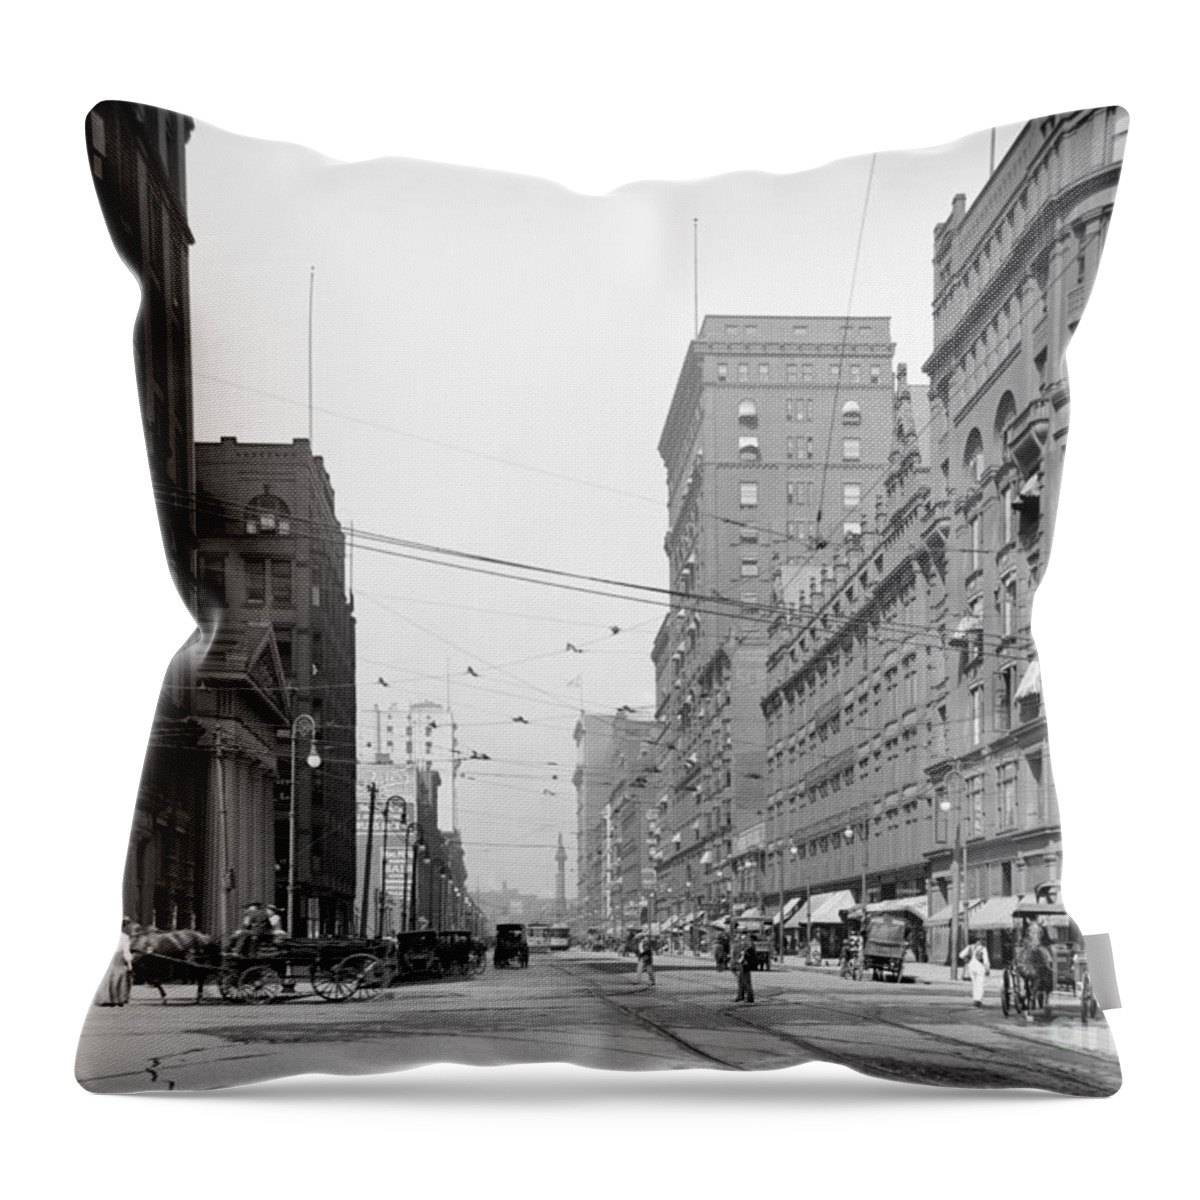 1905 Throw Pillow featuring the photograph DOWNTOWN CLEVELAND, c1905 by Granger